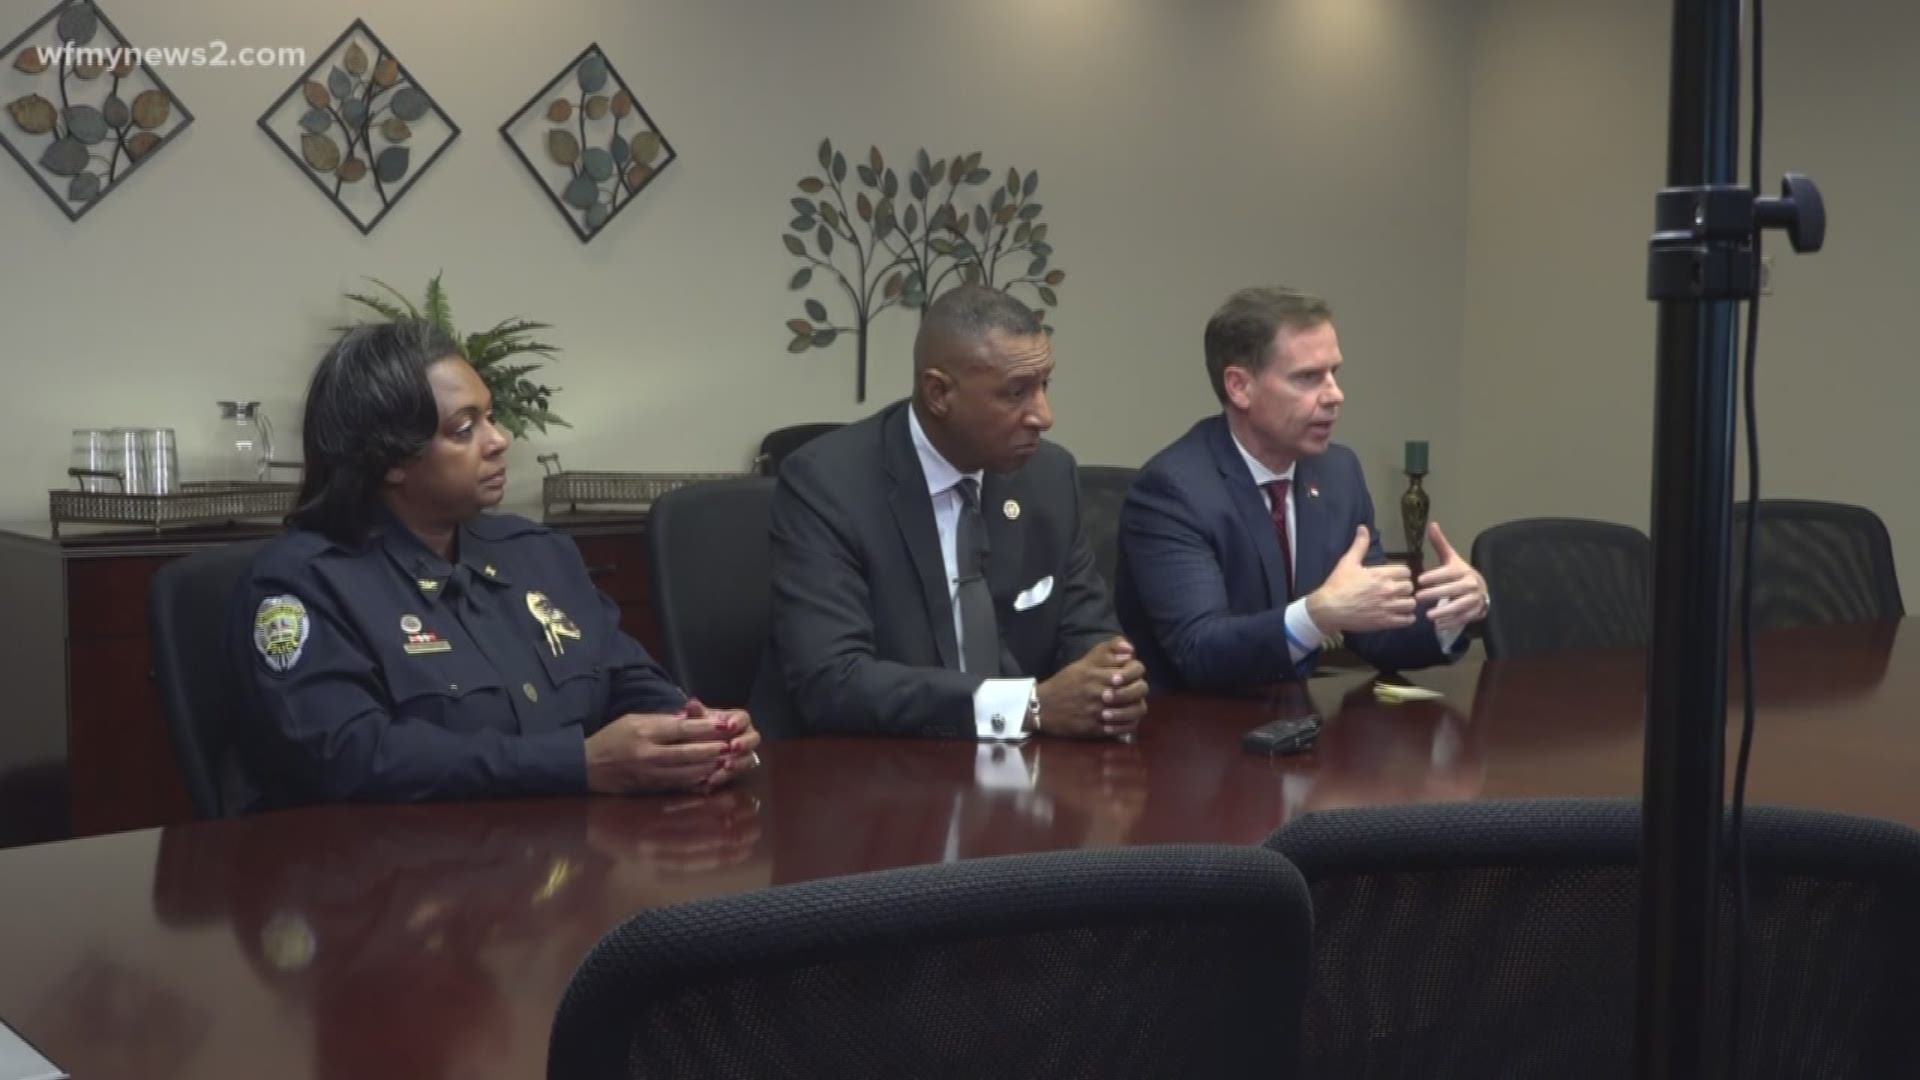 Winston-Salem police said there are nearly 600 validated gang members in the city.